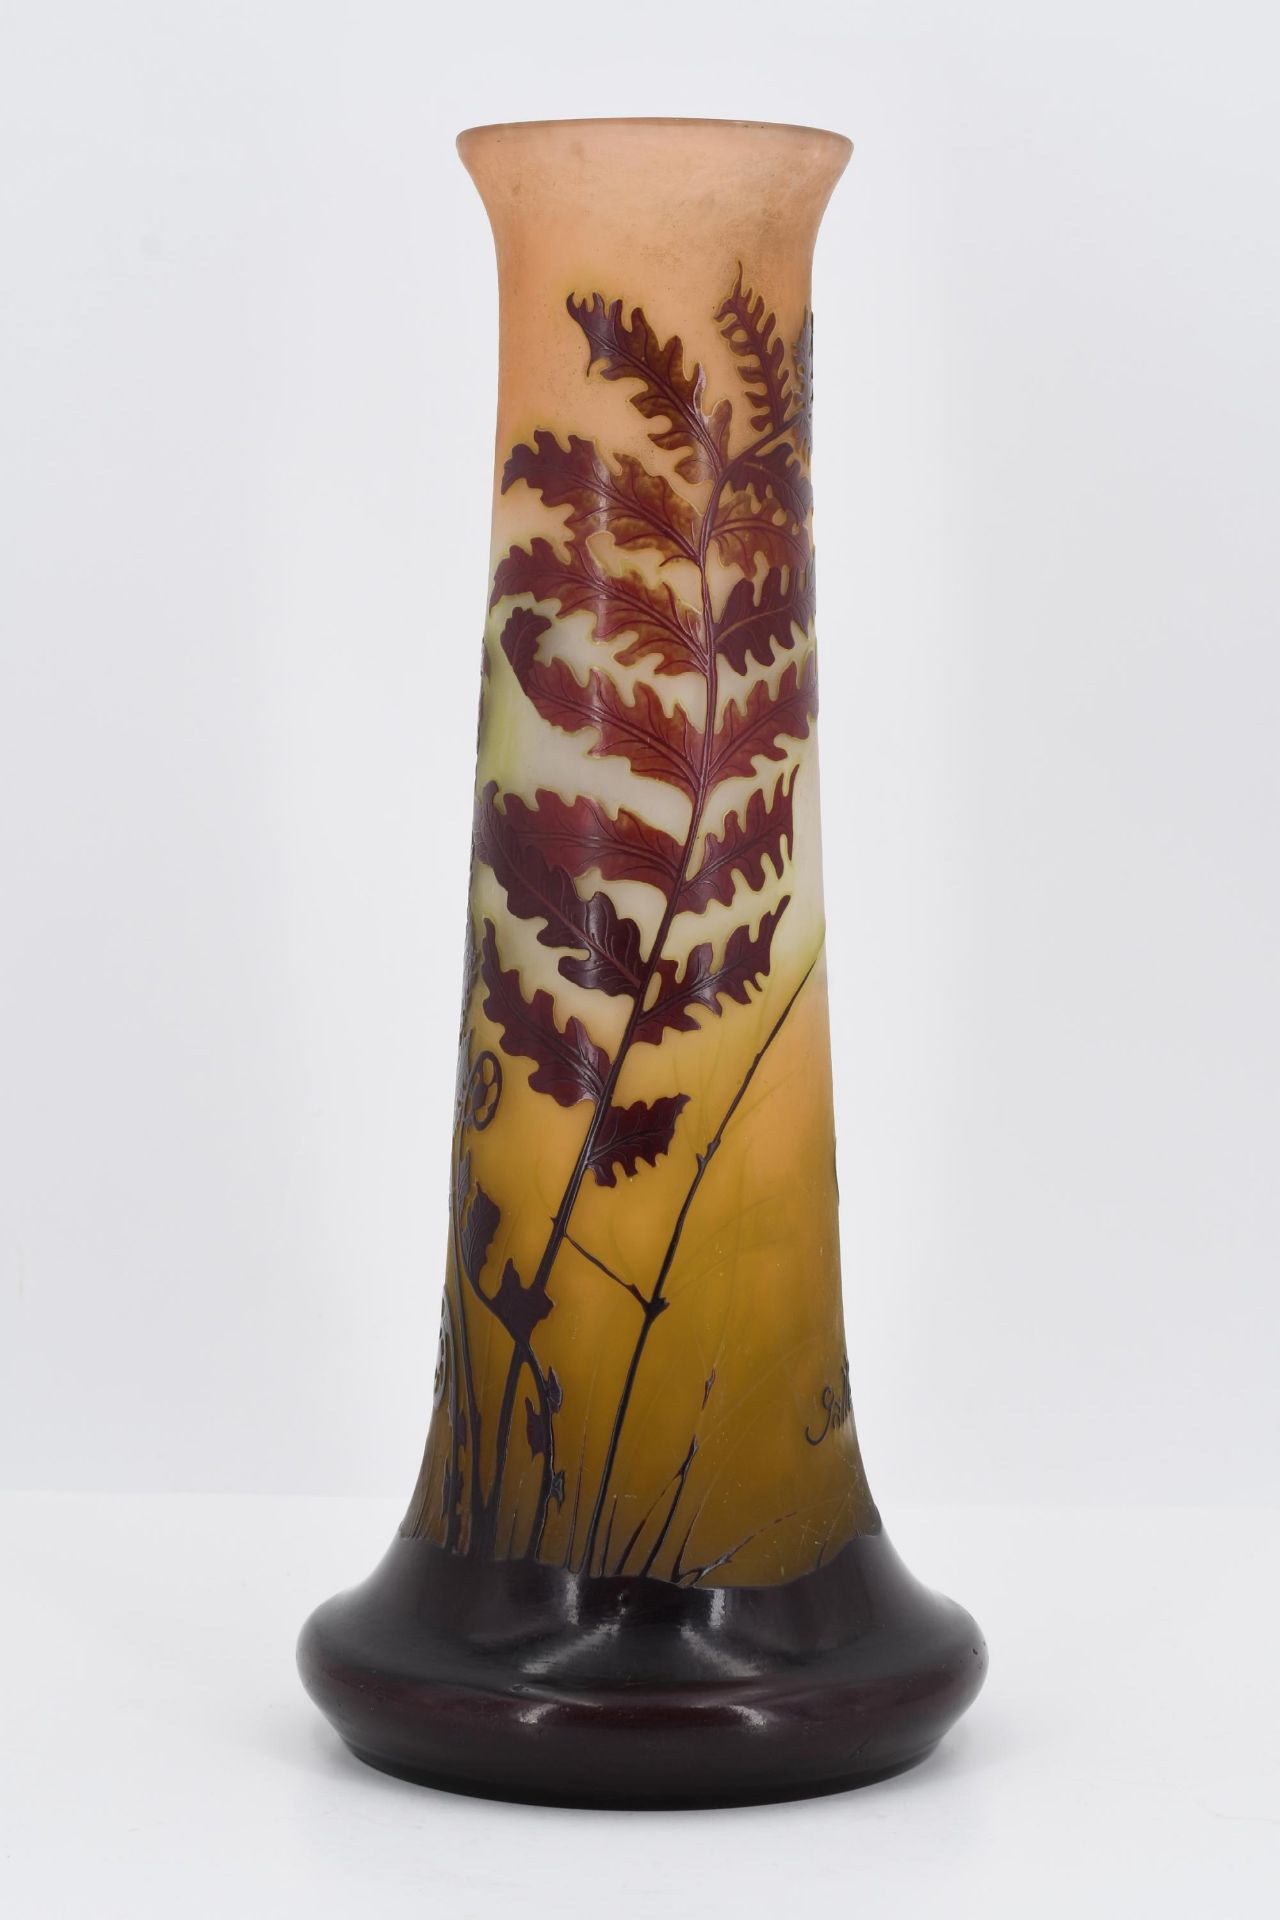 Glass vase with fern décor - Image 5 of 7